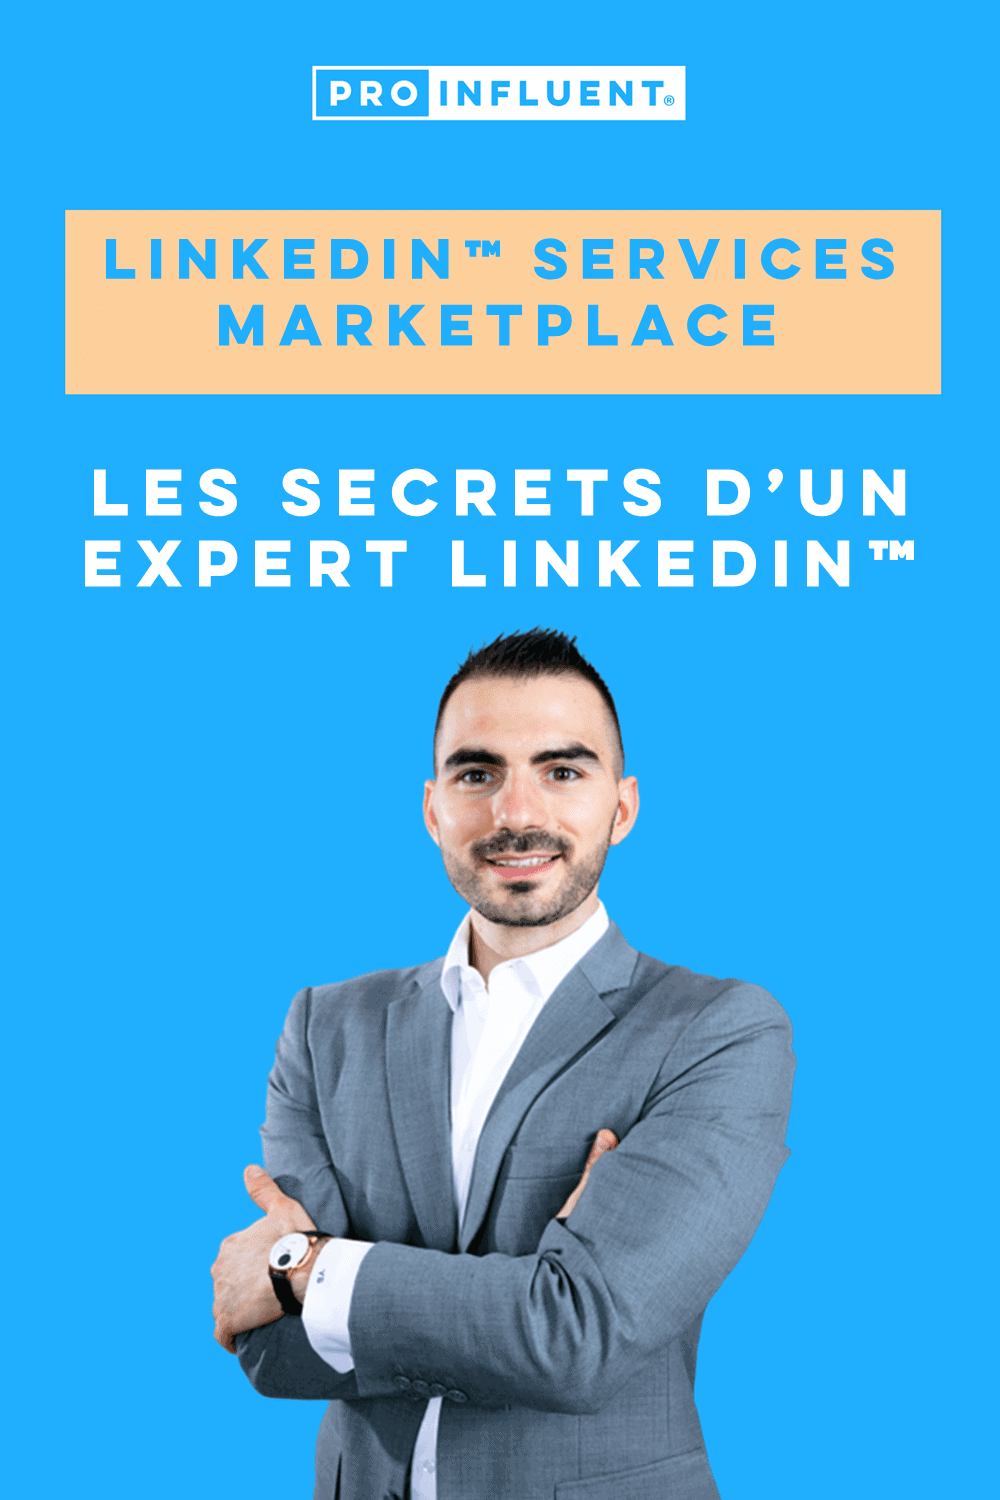 LinkedIn™ Services Marketplace: how to reference your services! Secrets of a LinkedIn™ expert